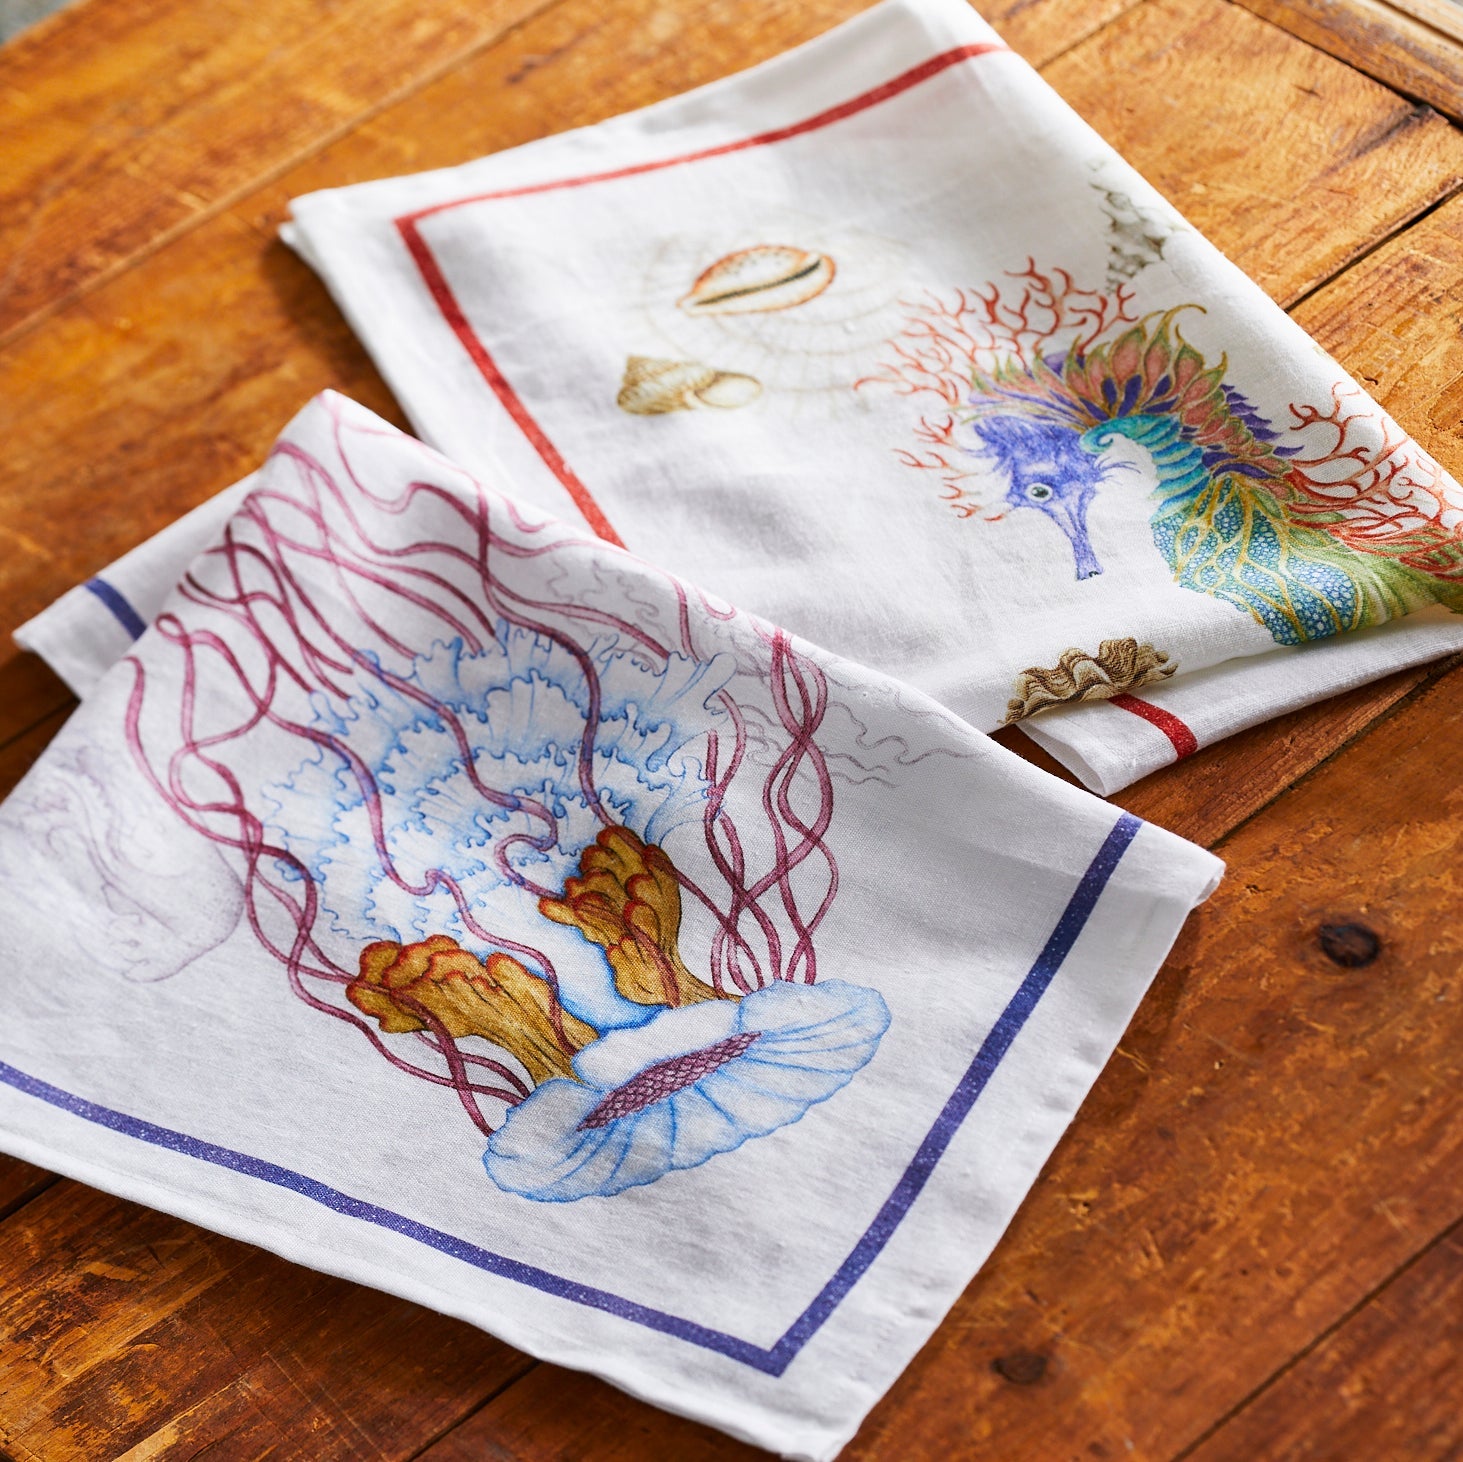 Reef Kitchen Towels in 100% Italian Linen, sold as a set of 2, from Caskata with Sea Creatures like Jellyfish and Seahorses